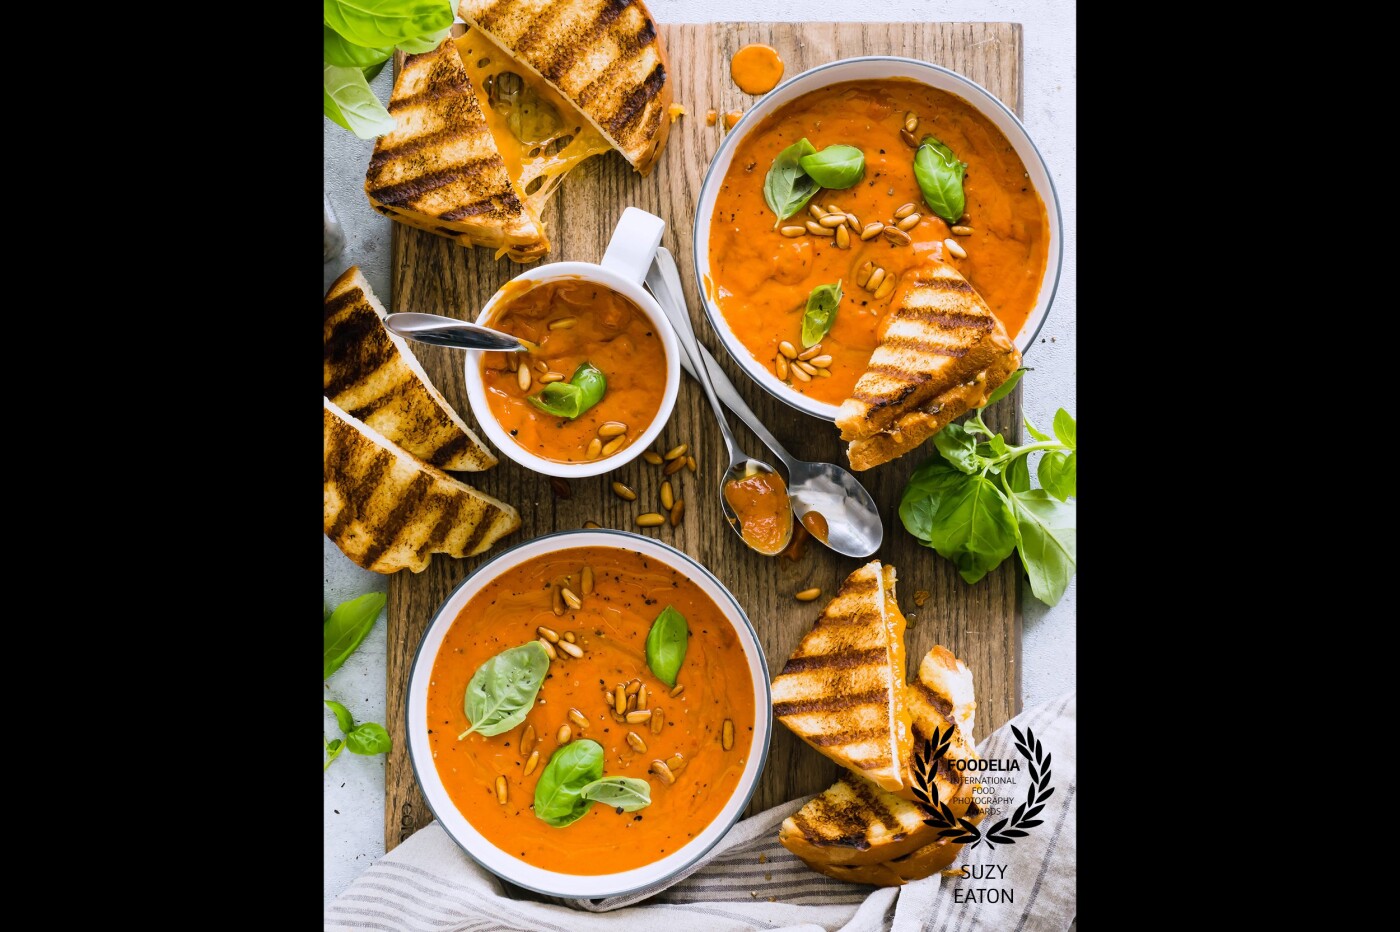 It doesn’t have to be cold outside to enjoy this childhood favorite! Tomato soup and grilled cheese sandwiches. But this soup takes it to the next level...with a little basil! 